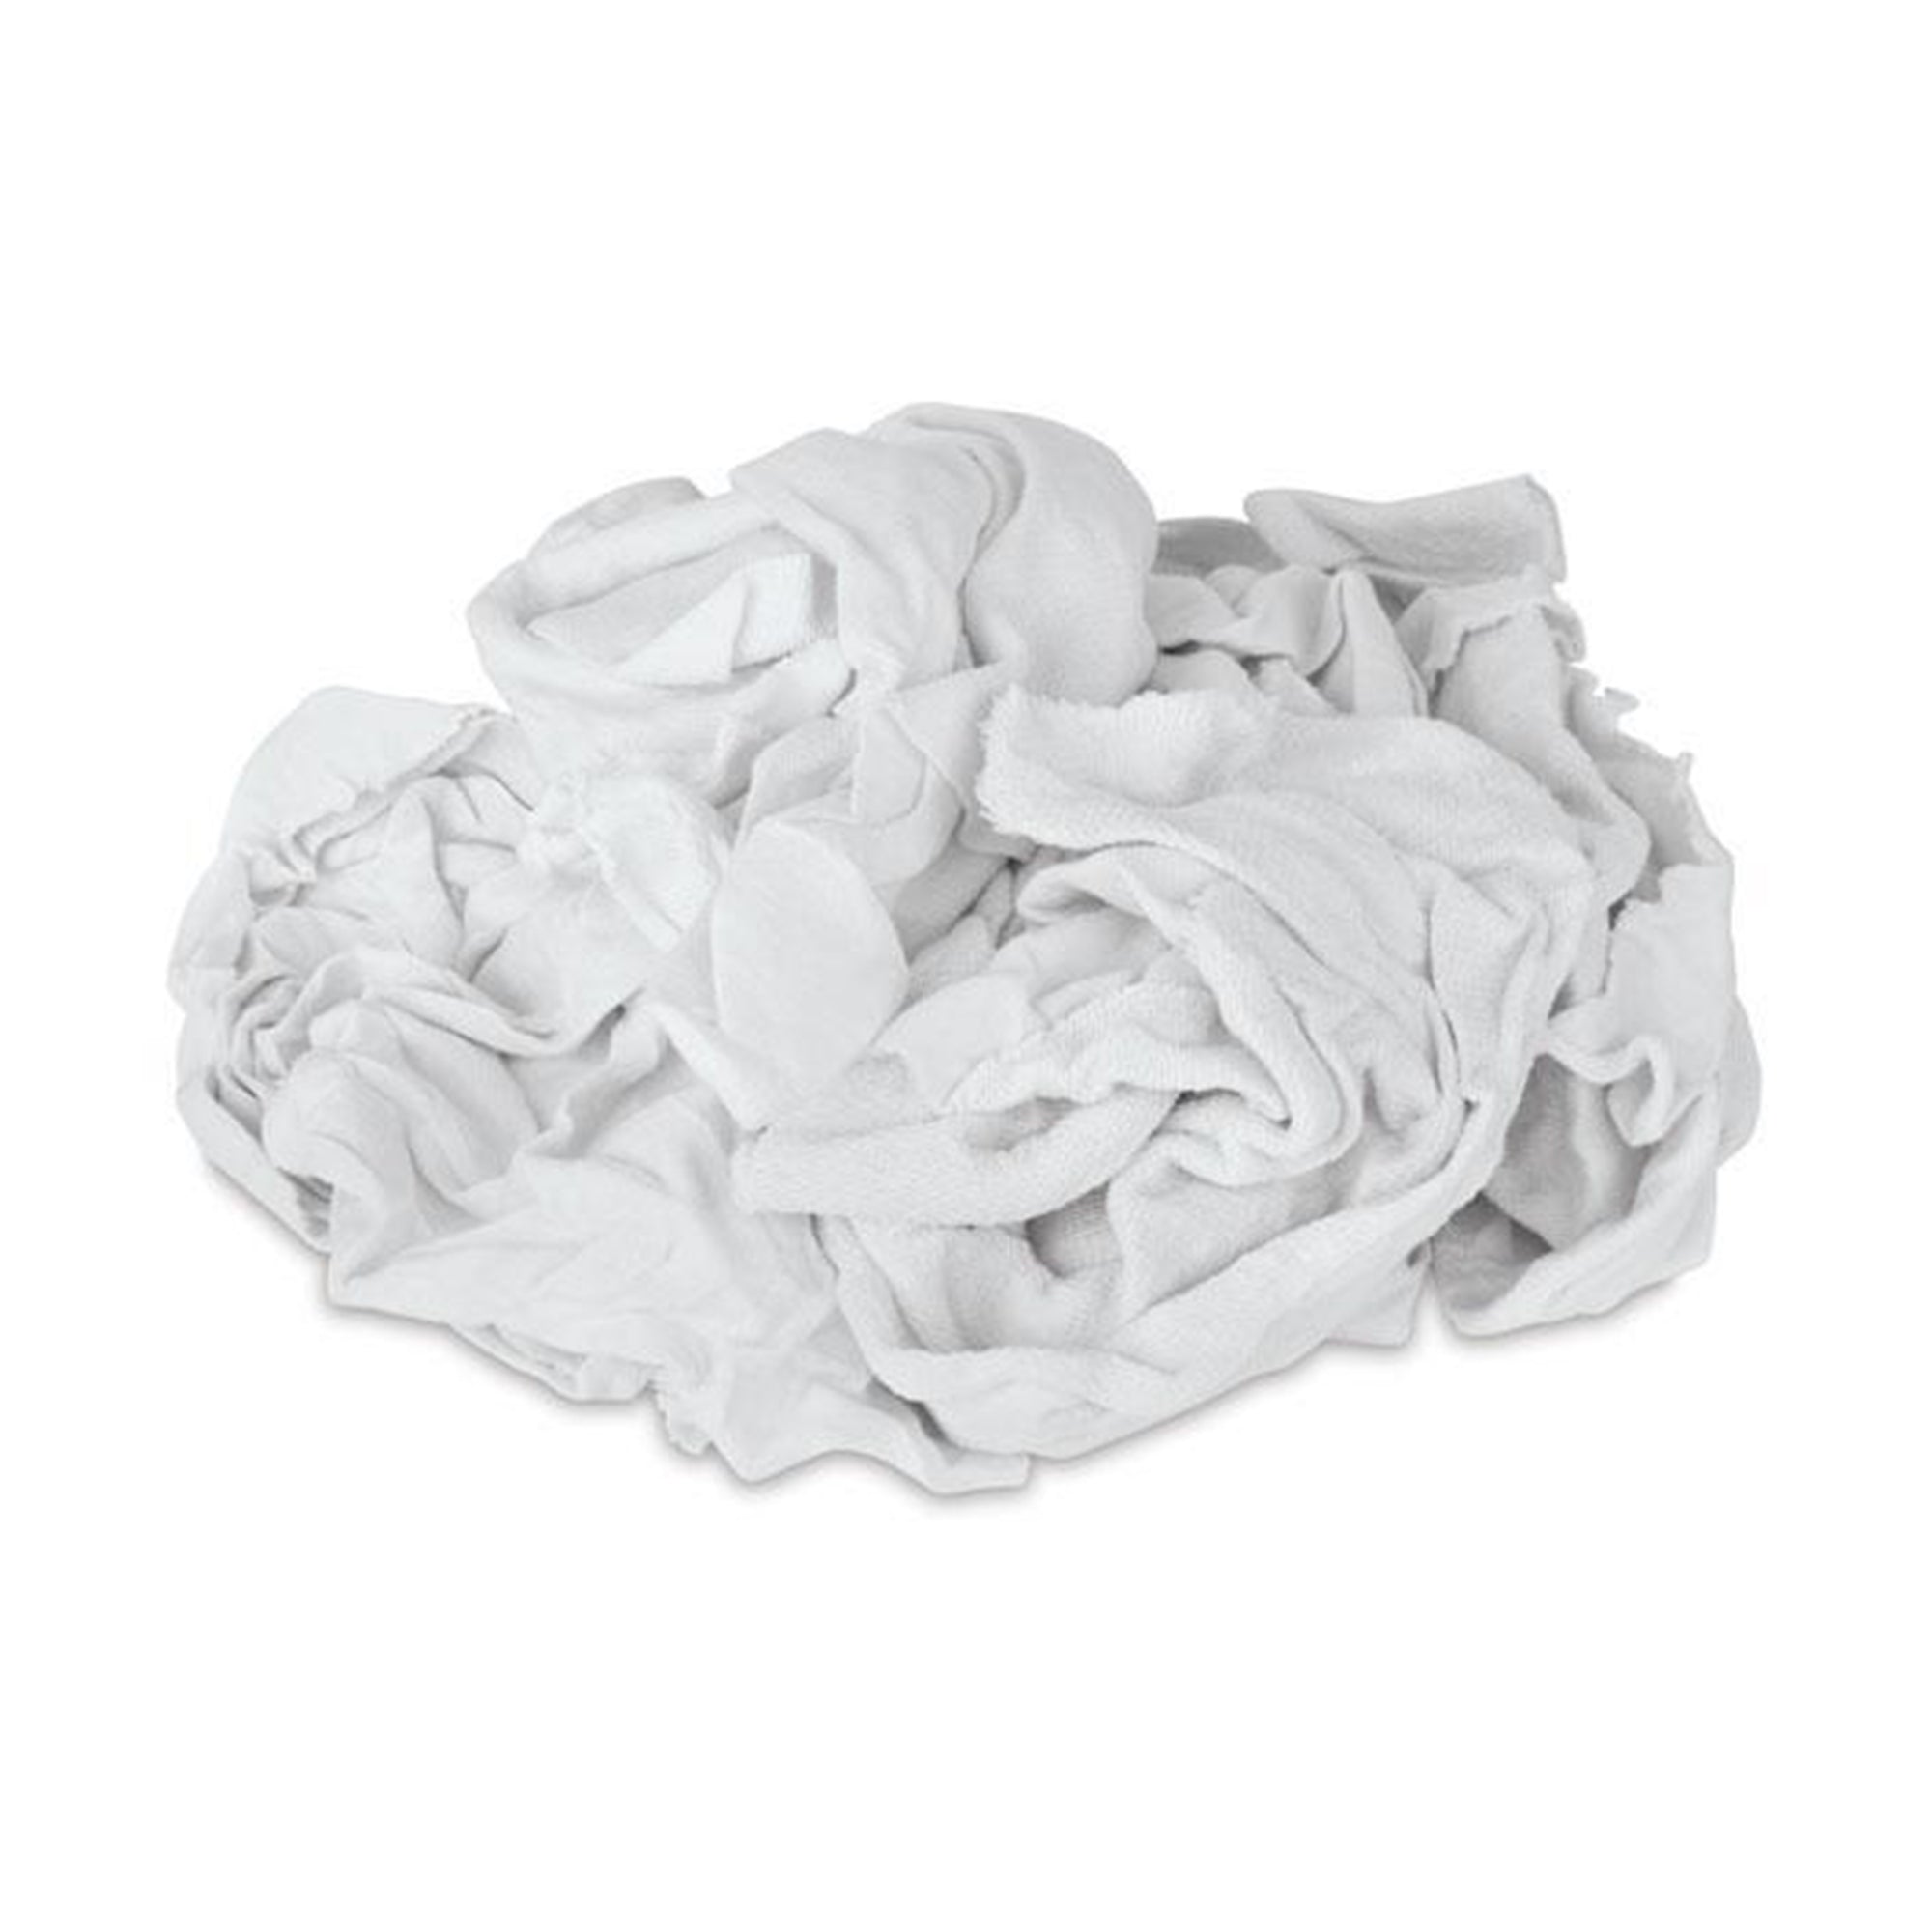 Bag of Rags-White new knit, available at Catalina Paints in Los Angeles County, CA.